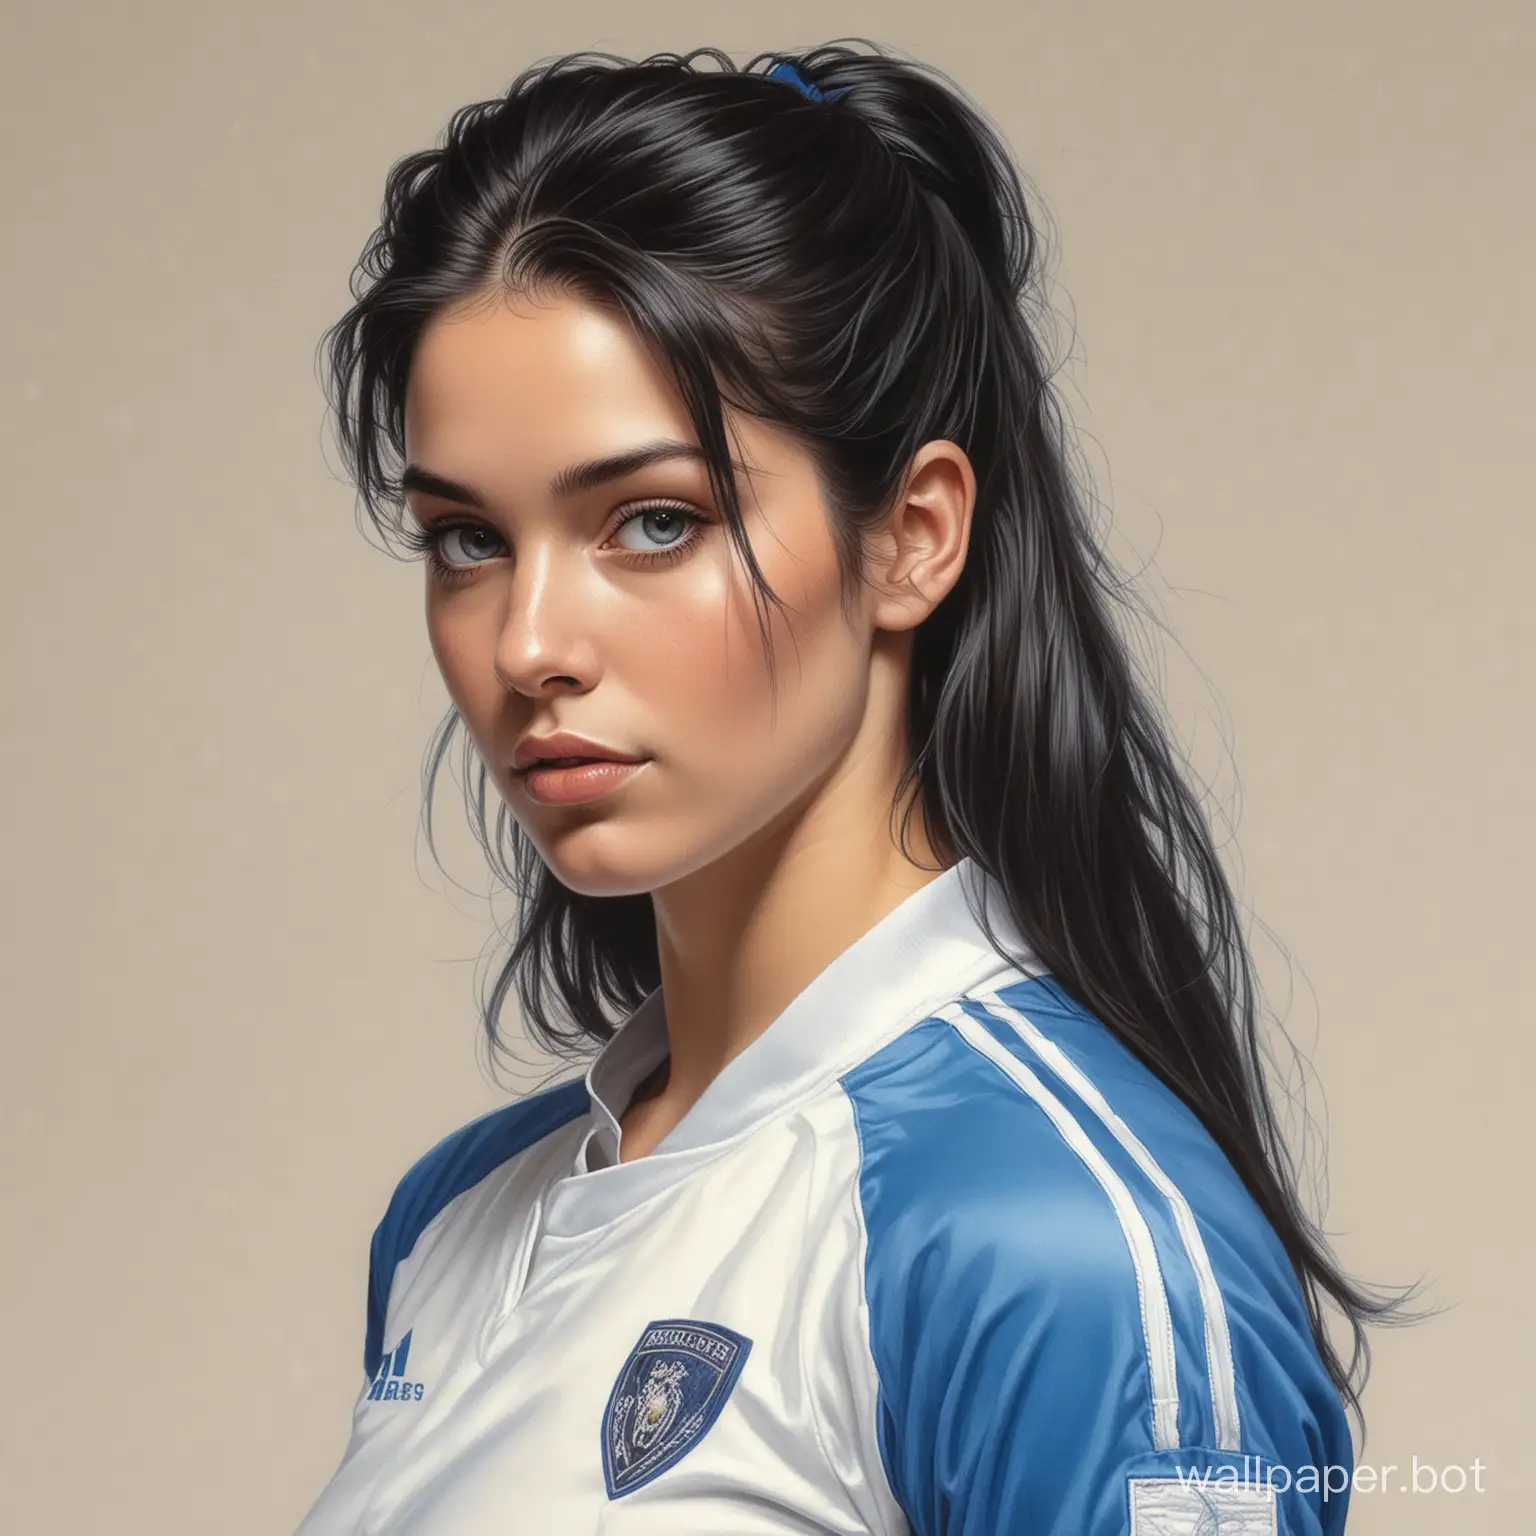 Portrait-of-Young-Brooke-Shields-in-Soccer-Uniform-Realistic-Liner-Drawing-in-Boris-Vallejo-Style